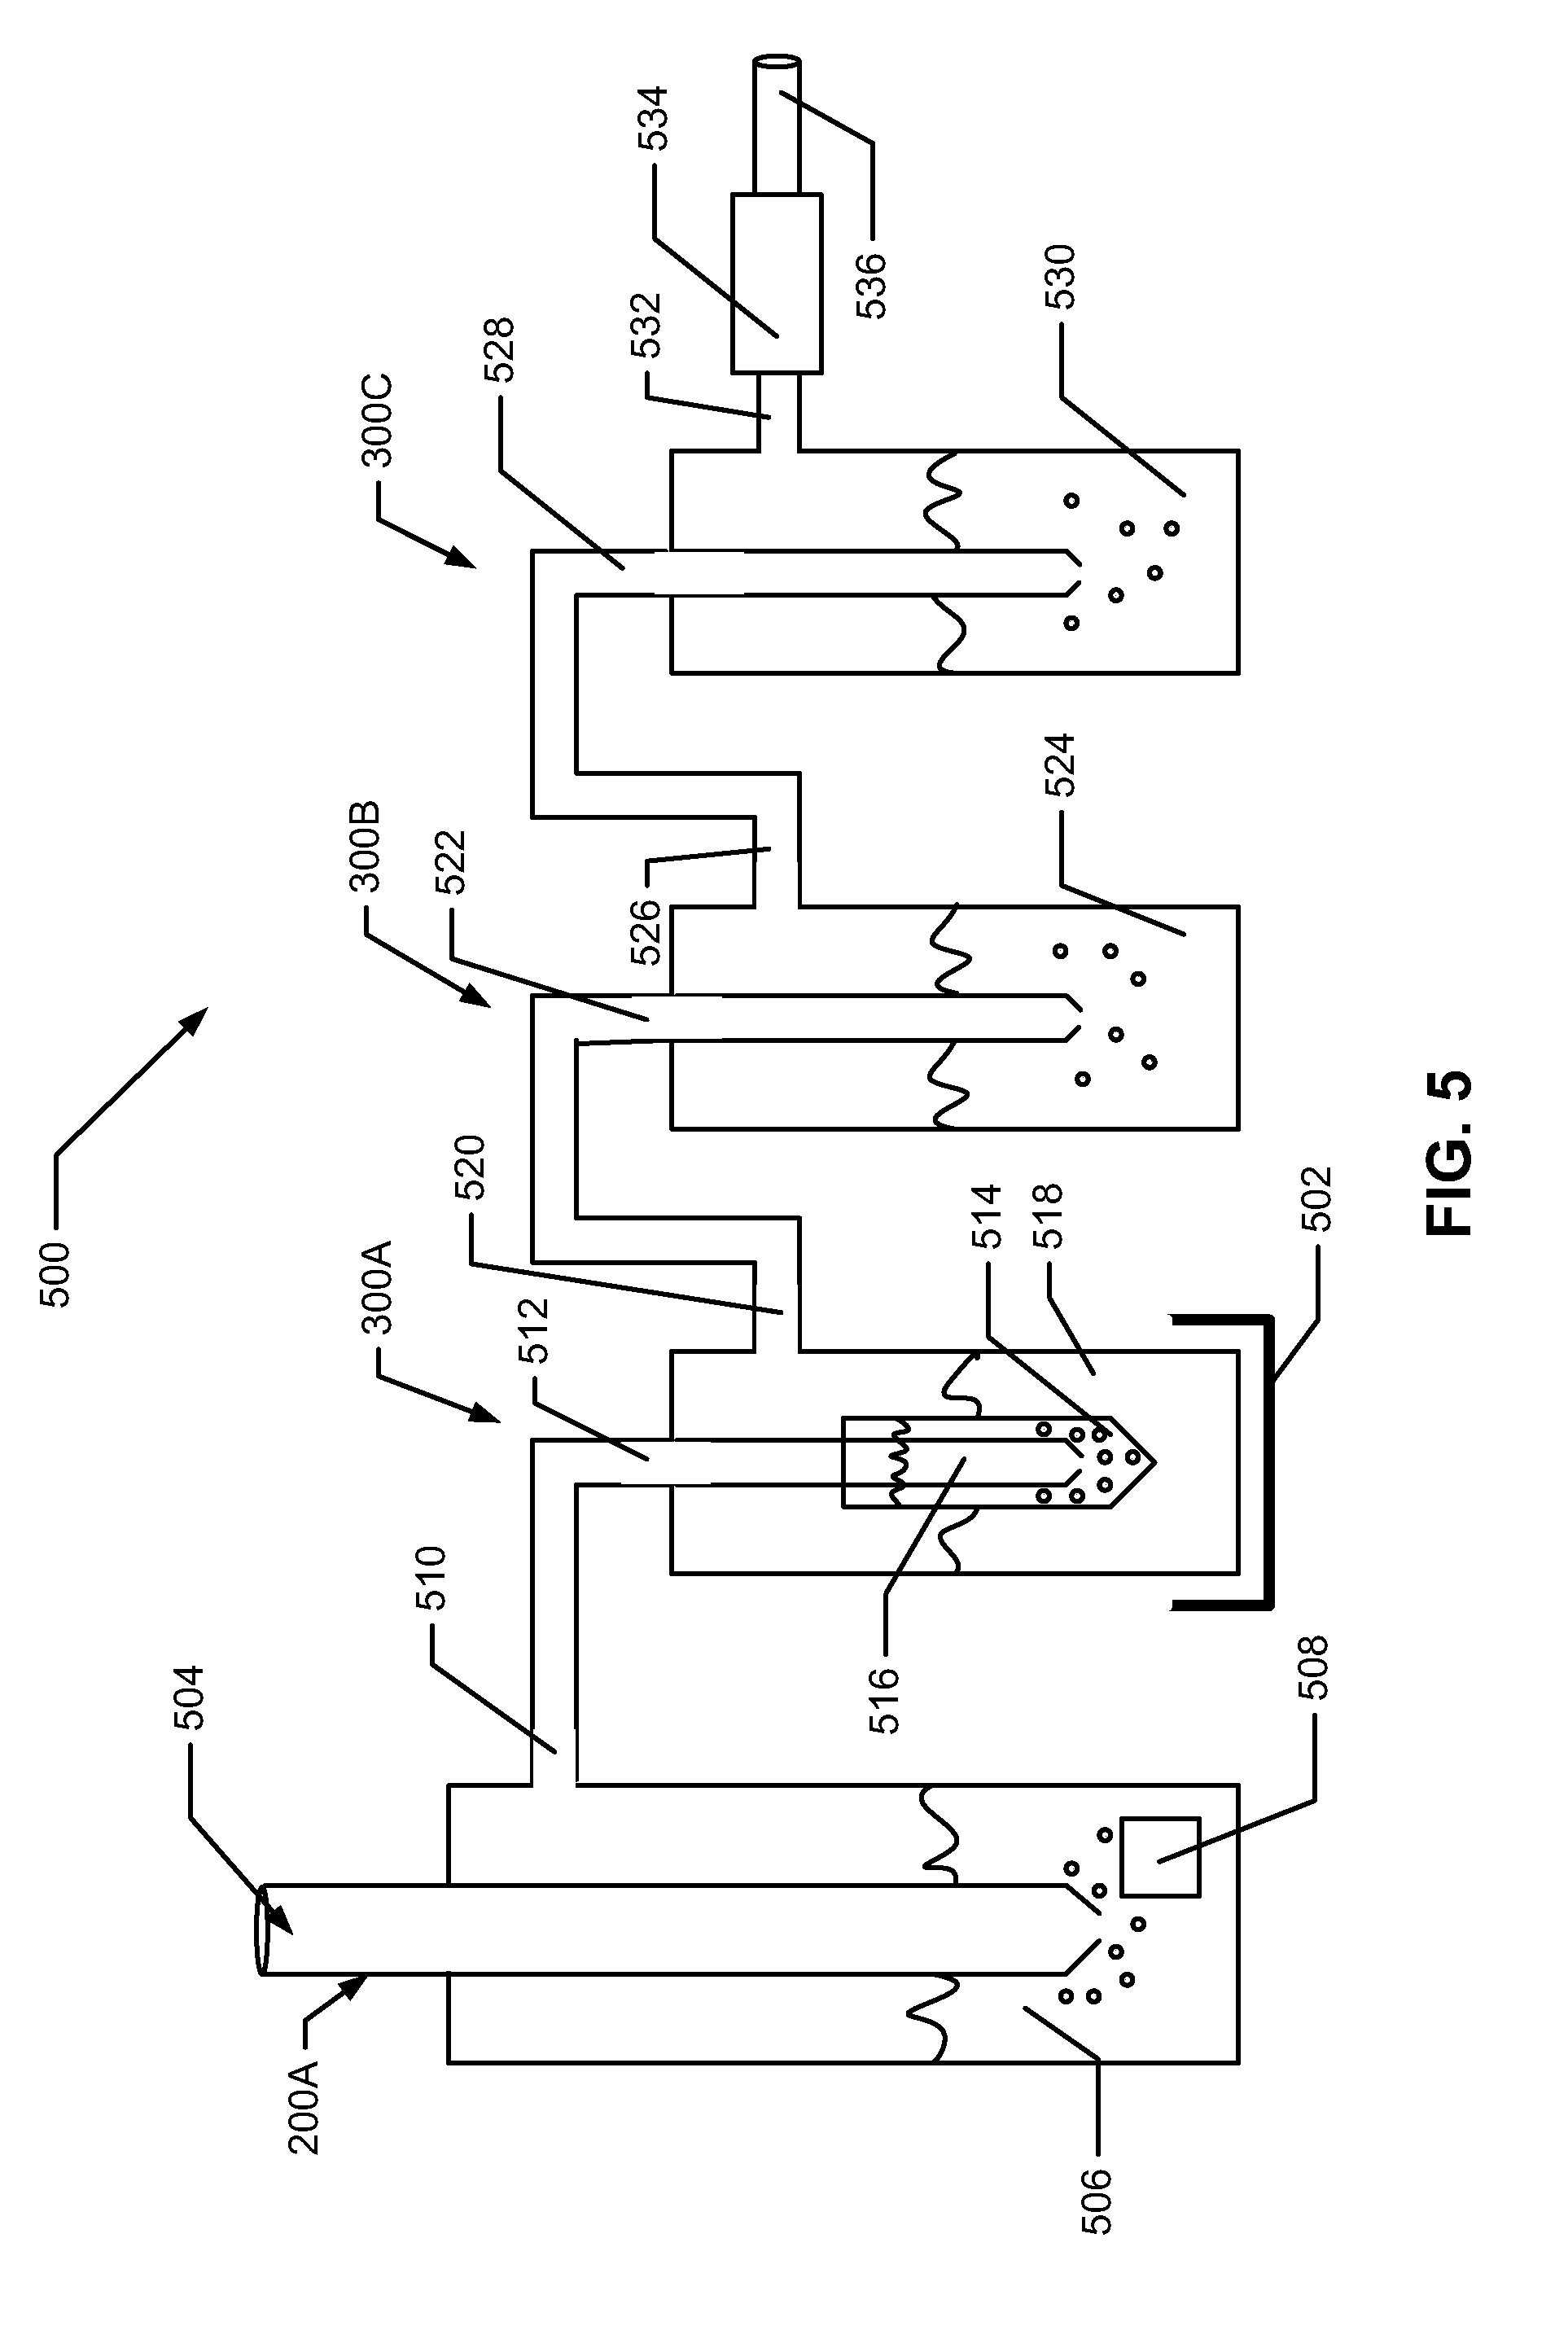 Method for separation of chemically pure Os from metal mixtures